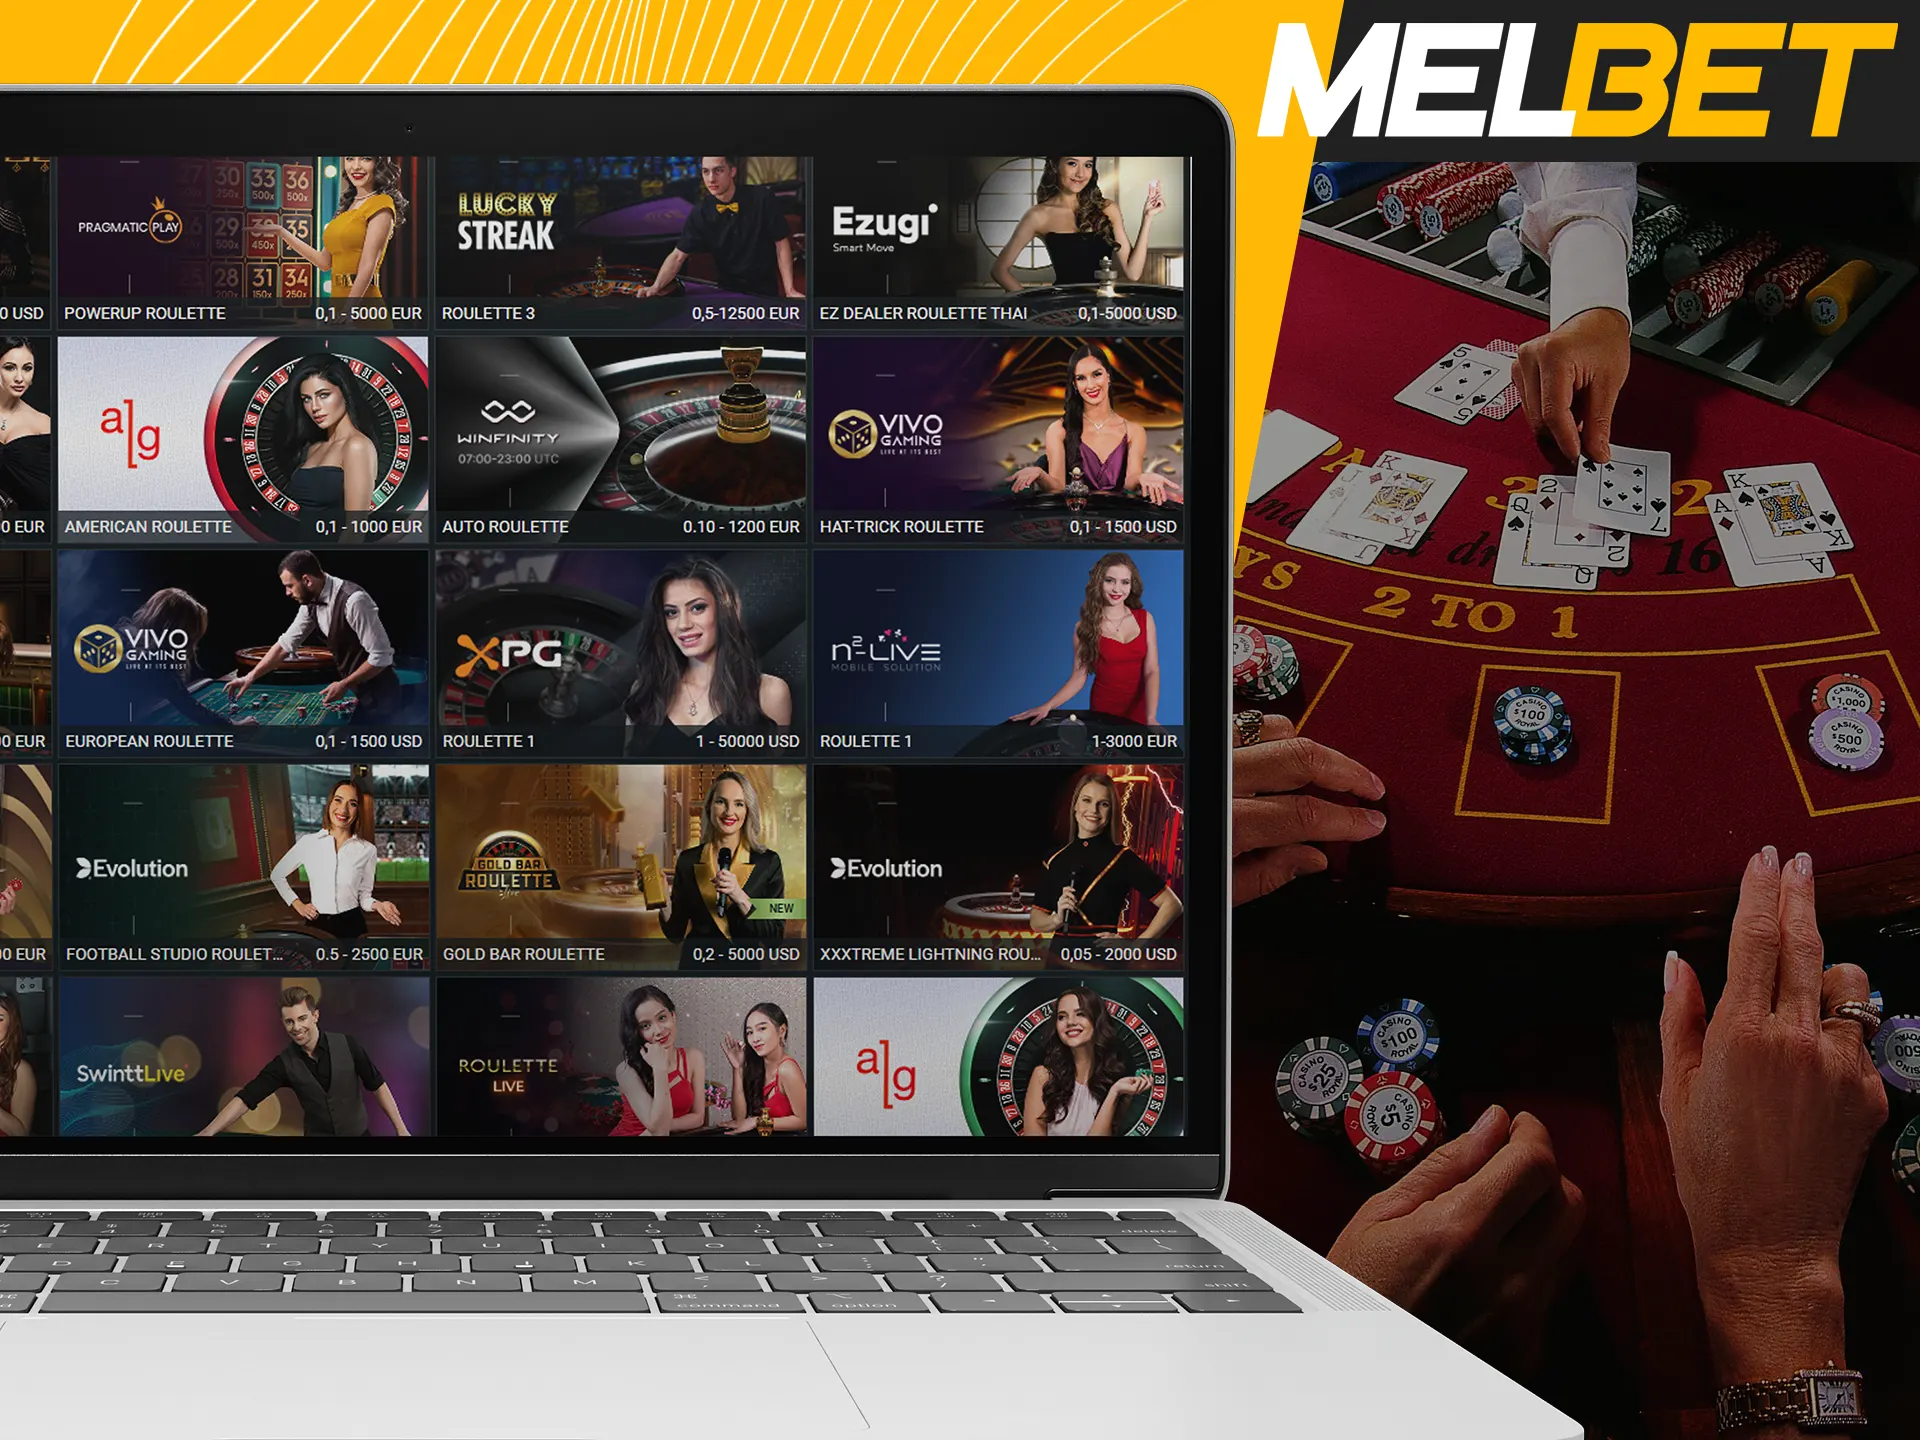 Play Melbet table games with real people,